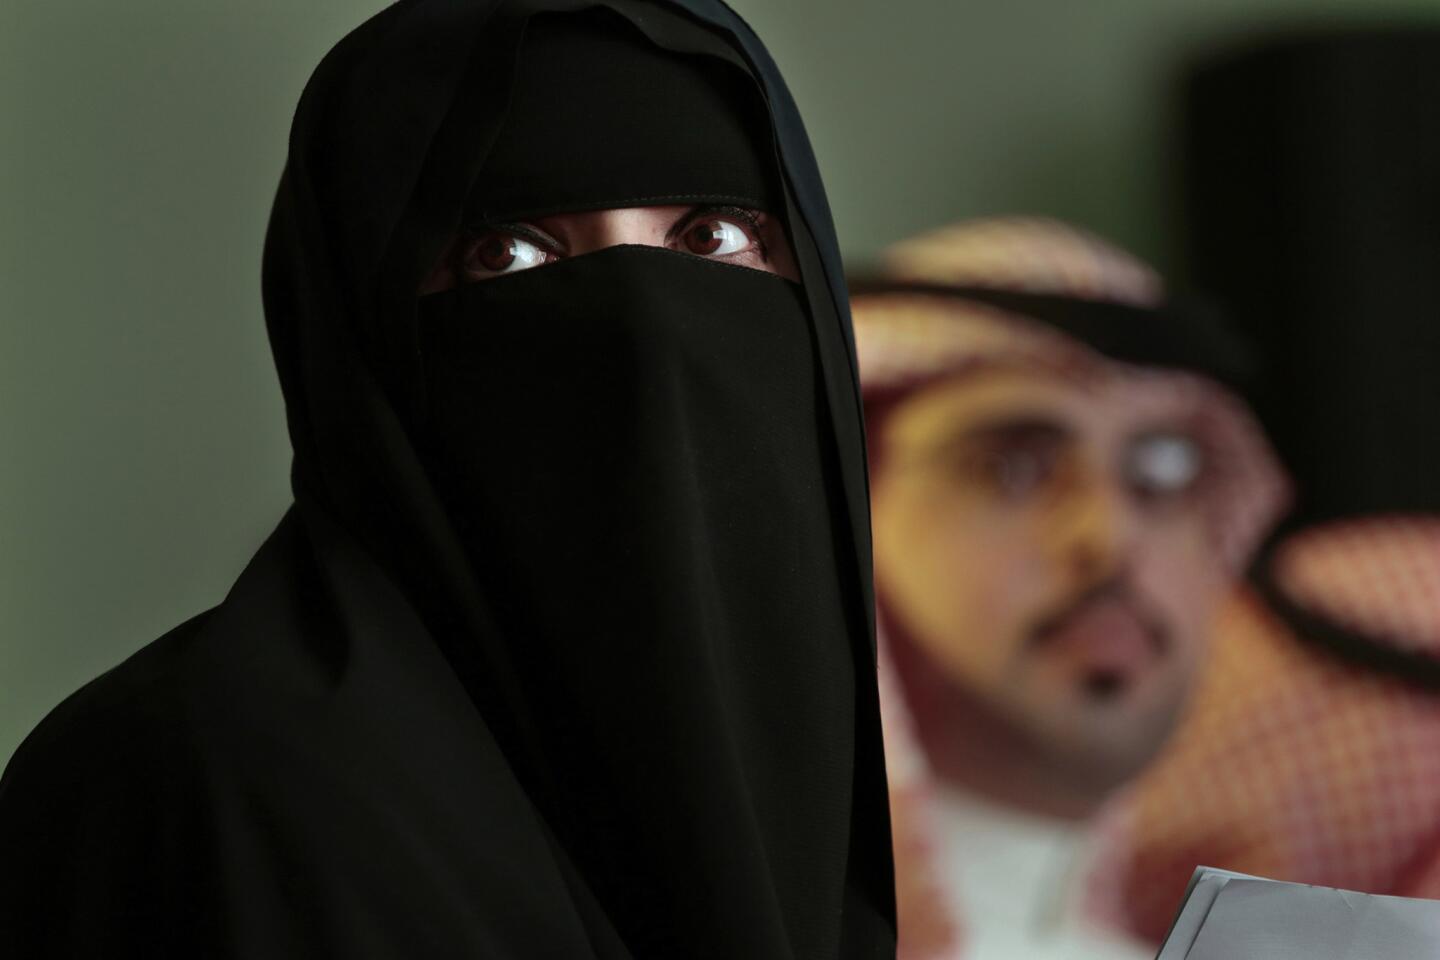 One of the few female journalists in Riyadh attends a news conference. Saudi Arabia women are entering the workforce in higher numbers, but they still face many challenges.